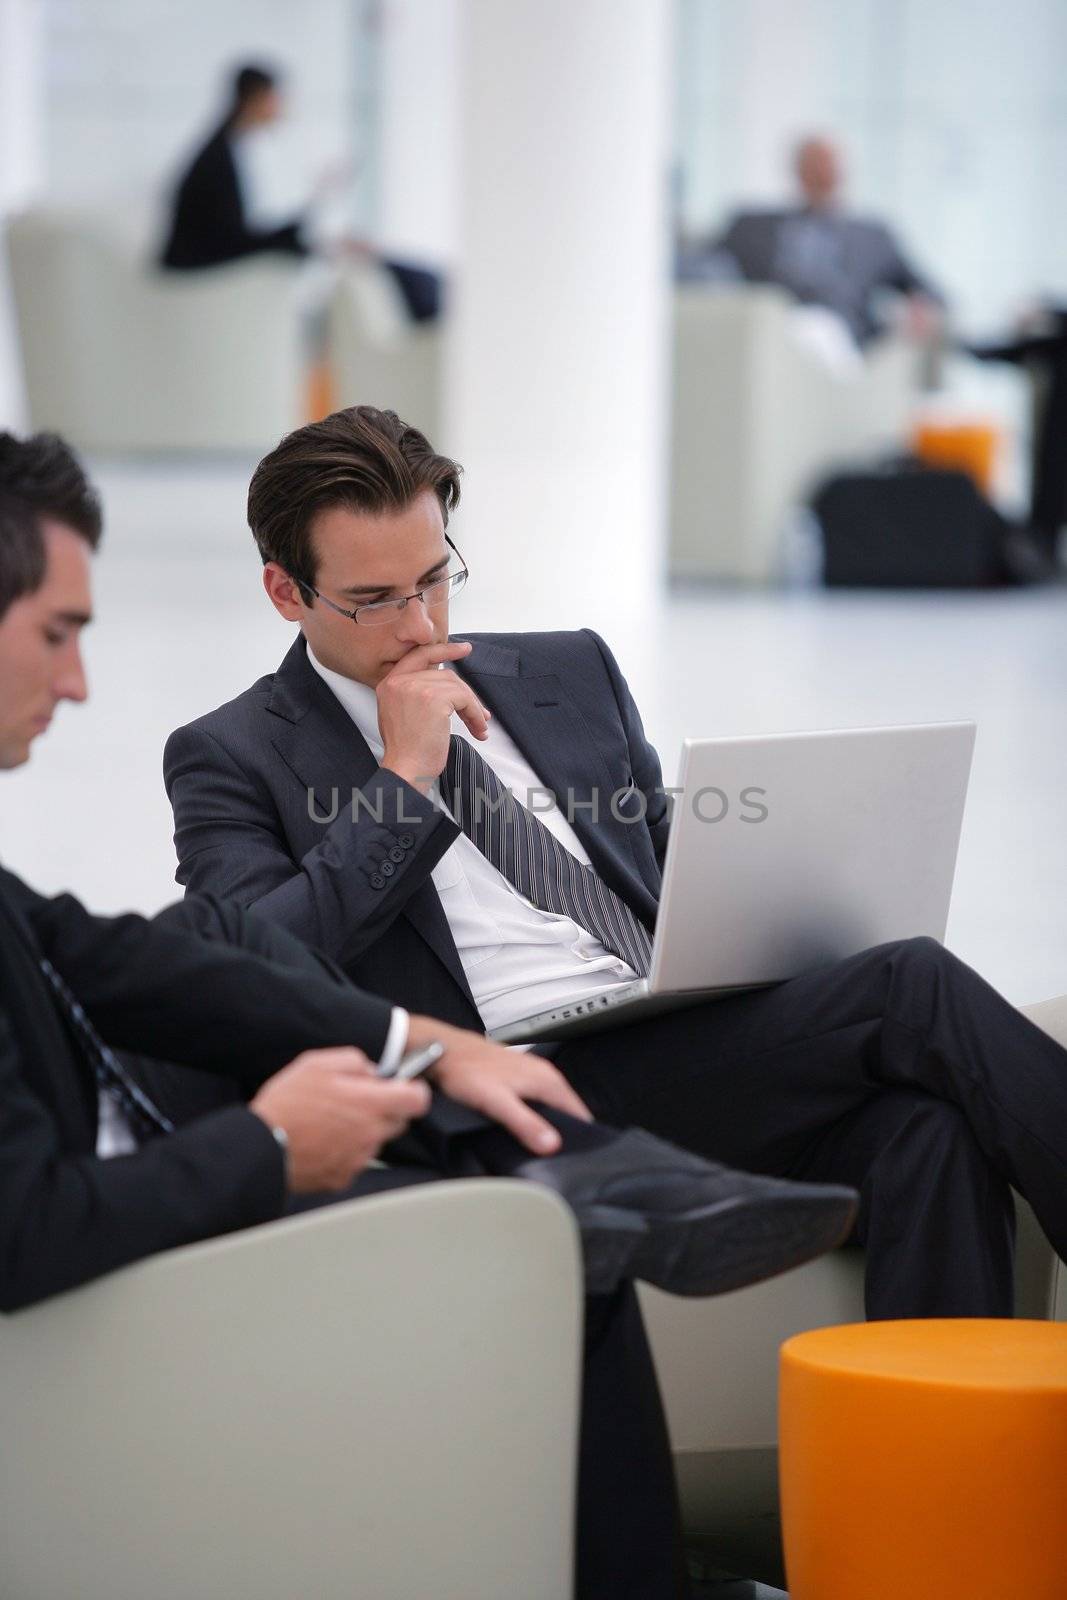 Businessmen waiting in airport lounge